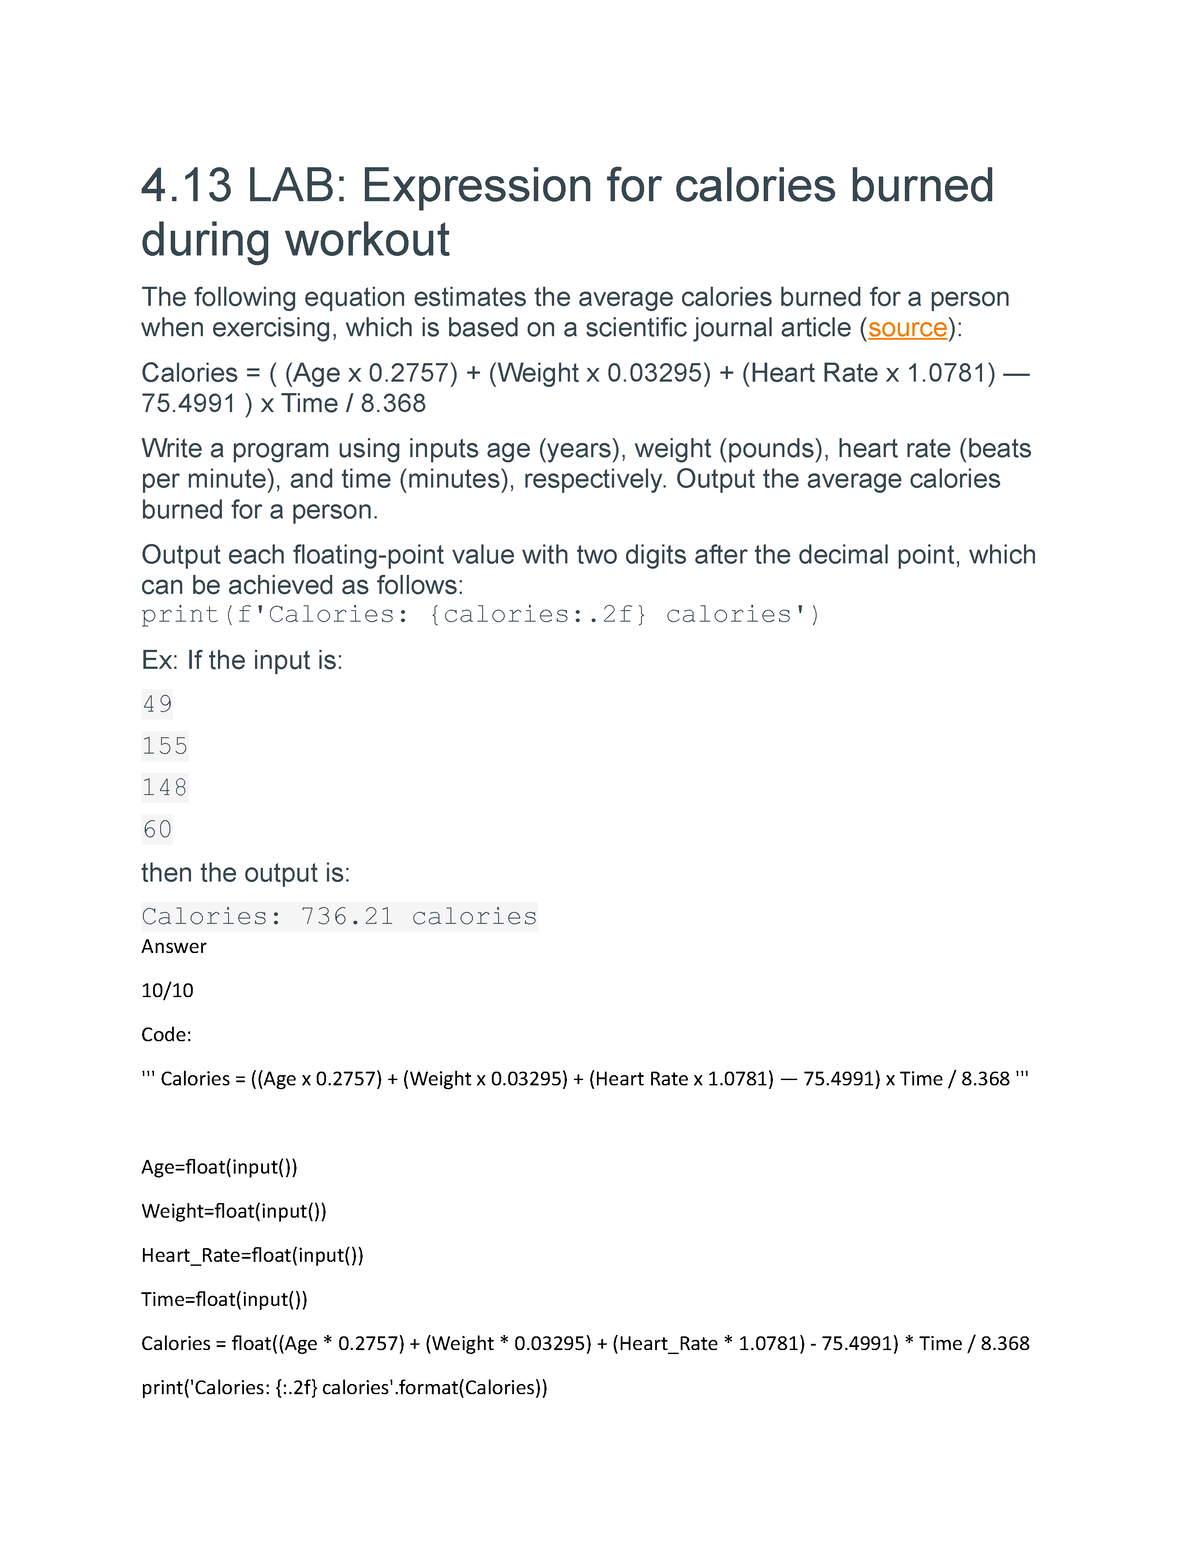 2.27 lab expression for calories burned during workout c